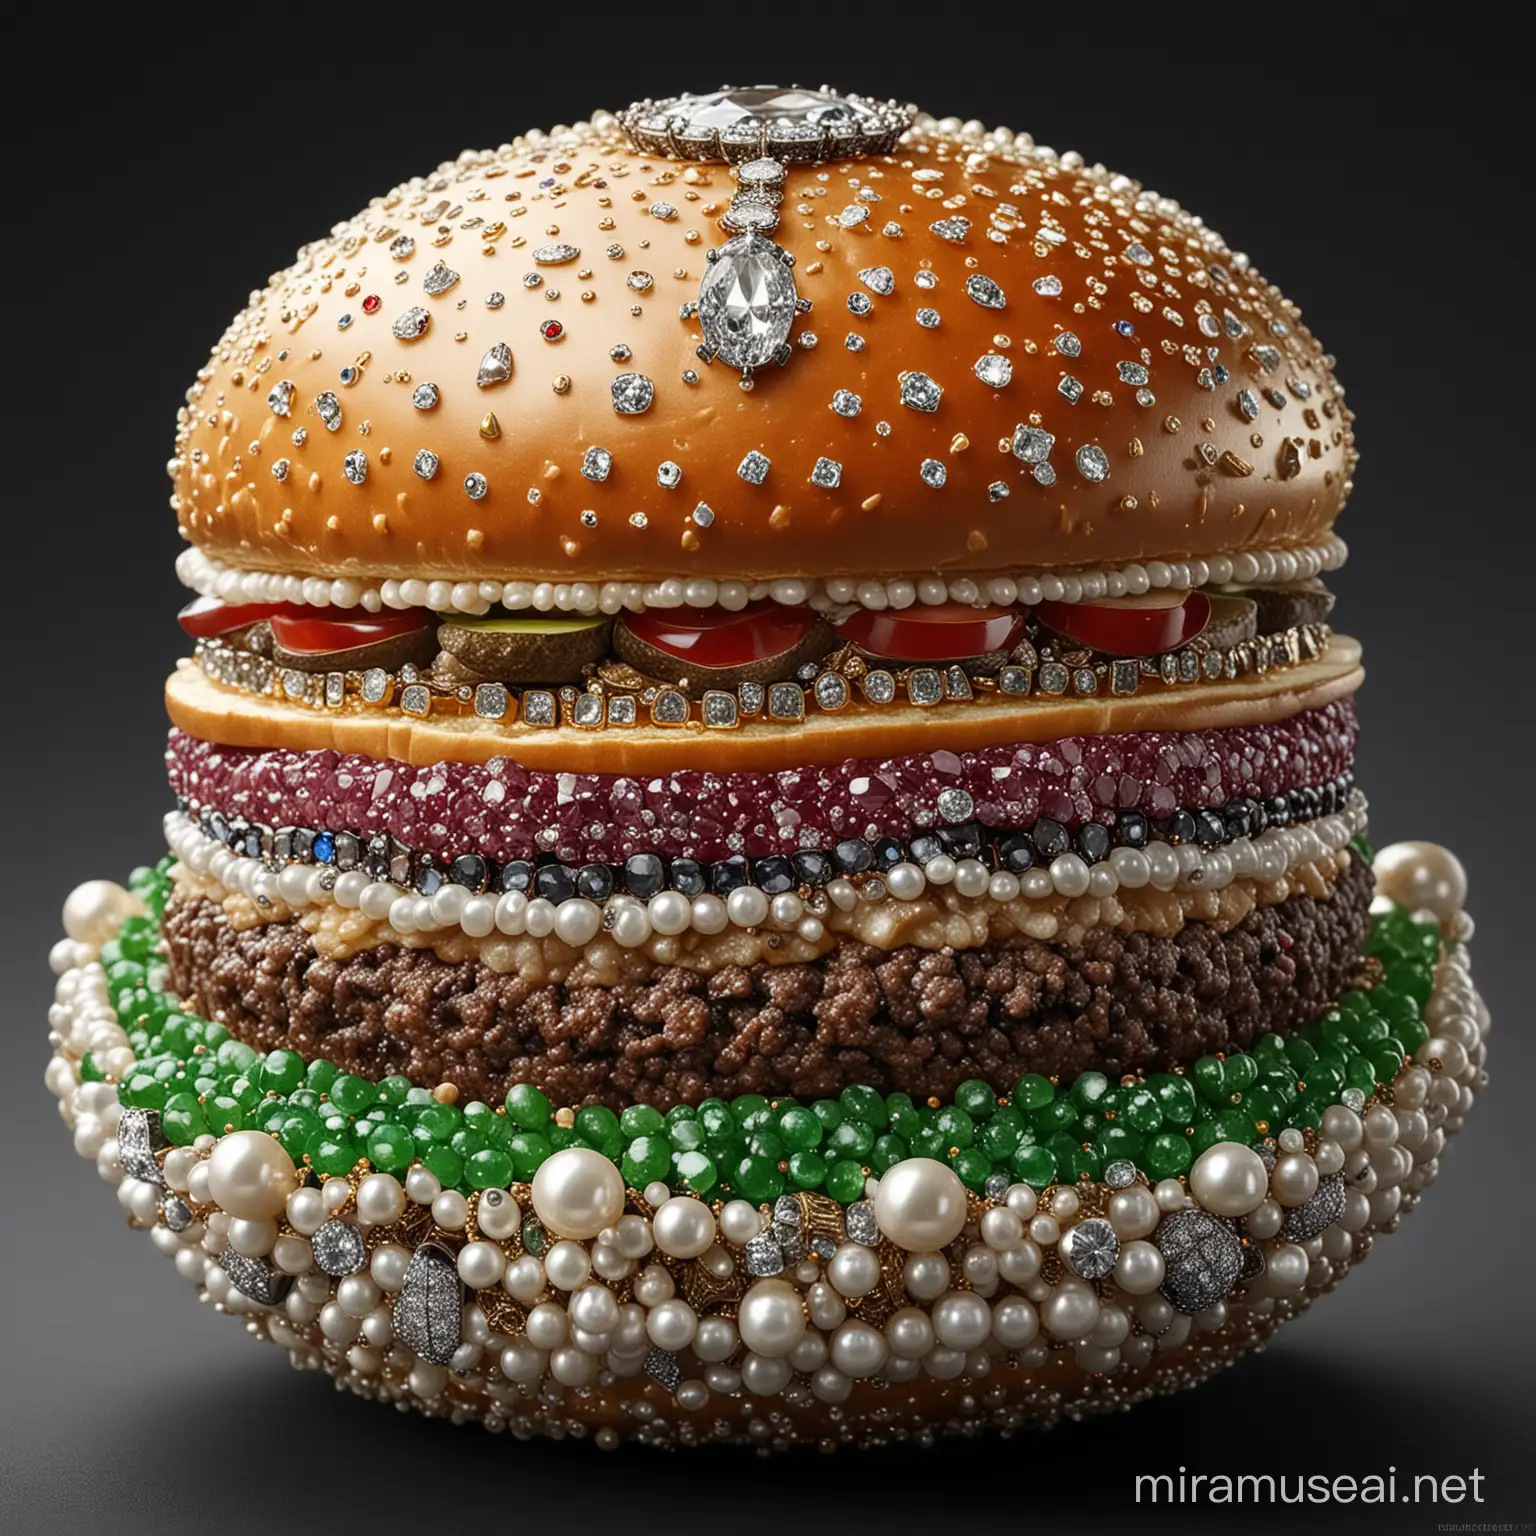 a piece of hamburger with jewels, pearls and diamonds, in the style of iconic works of art history, colorized, yankeecore, i can't believe how beautiful this is, gemstone, oversized objects, sabattier effect